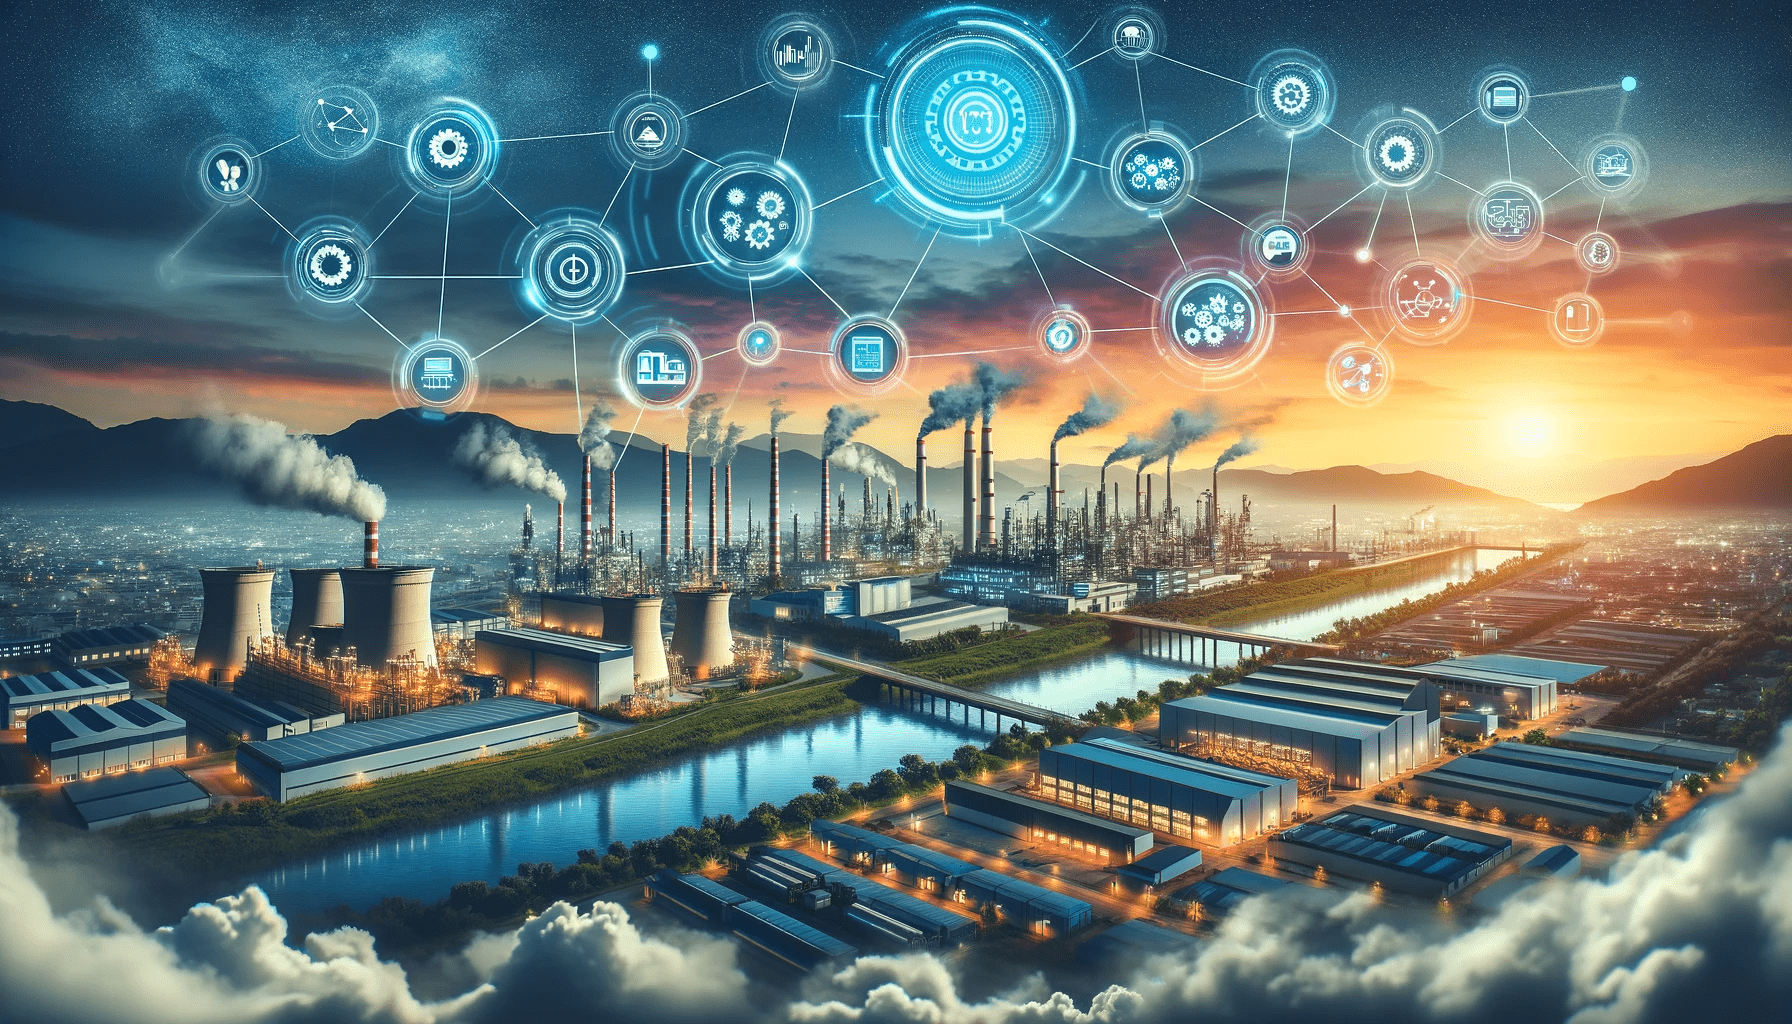 Industry 4.0 in Action: Envisioning the Smart Factories of Tomorrow